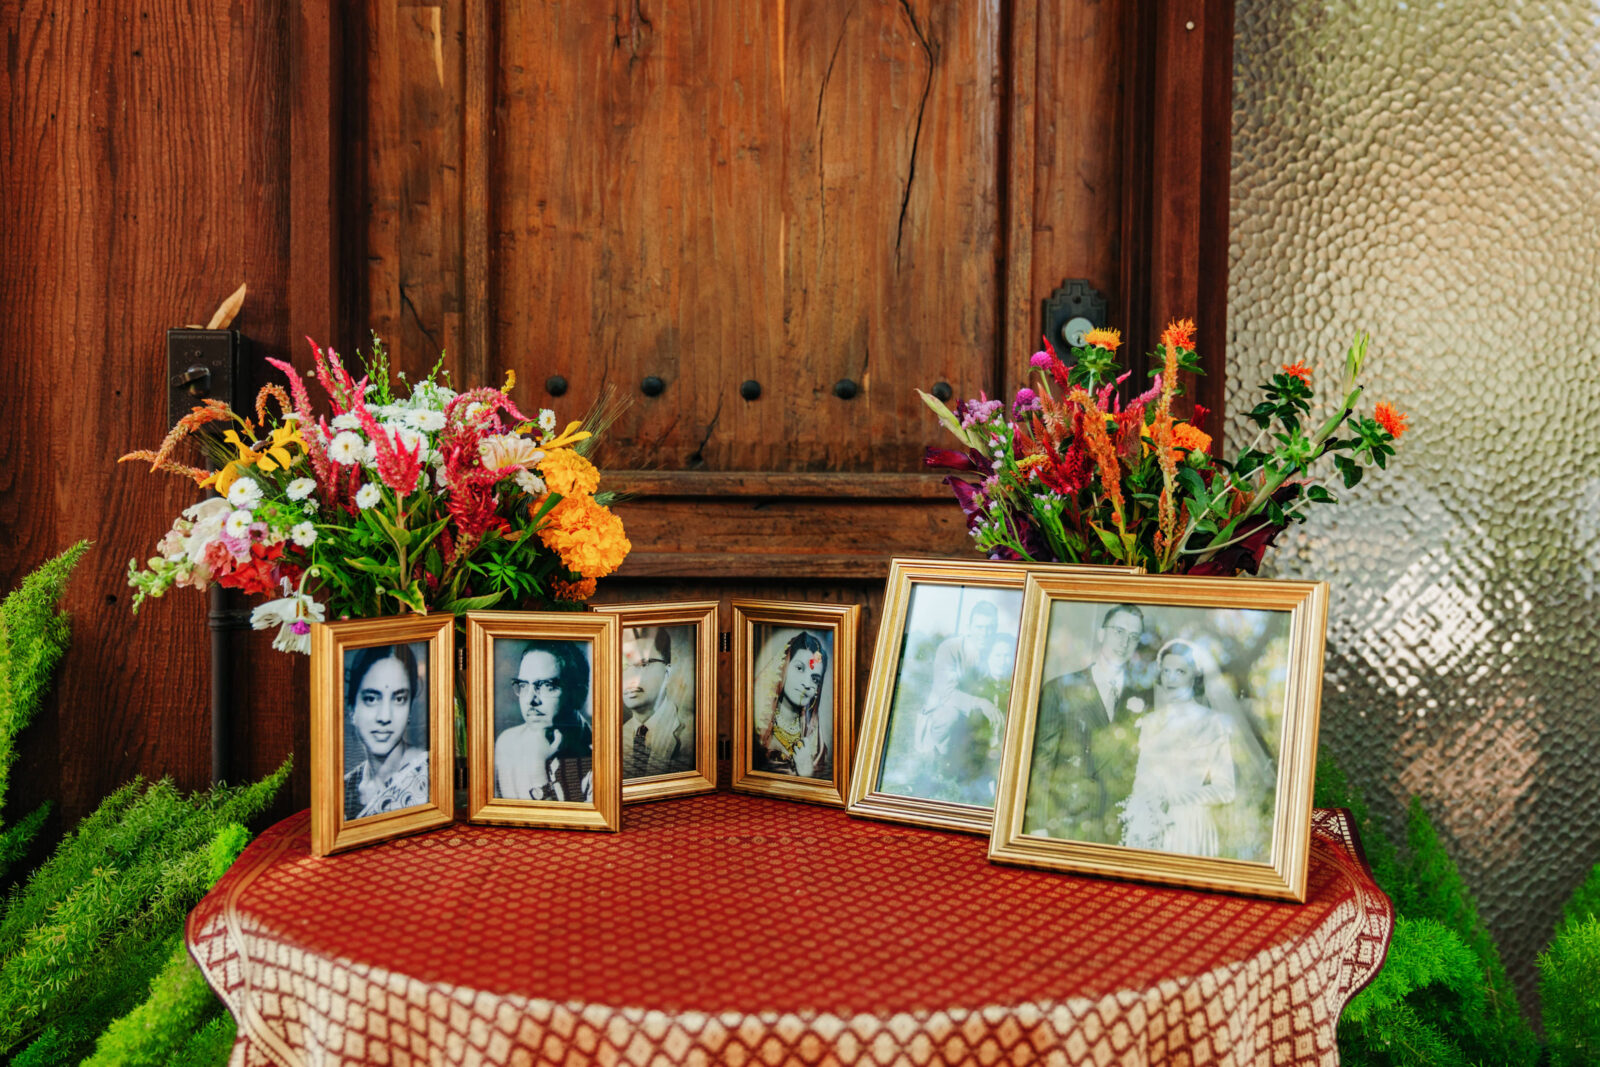 Vibrant flowers surround black and white wedding photos featuring the couple's parents